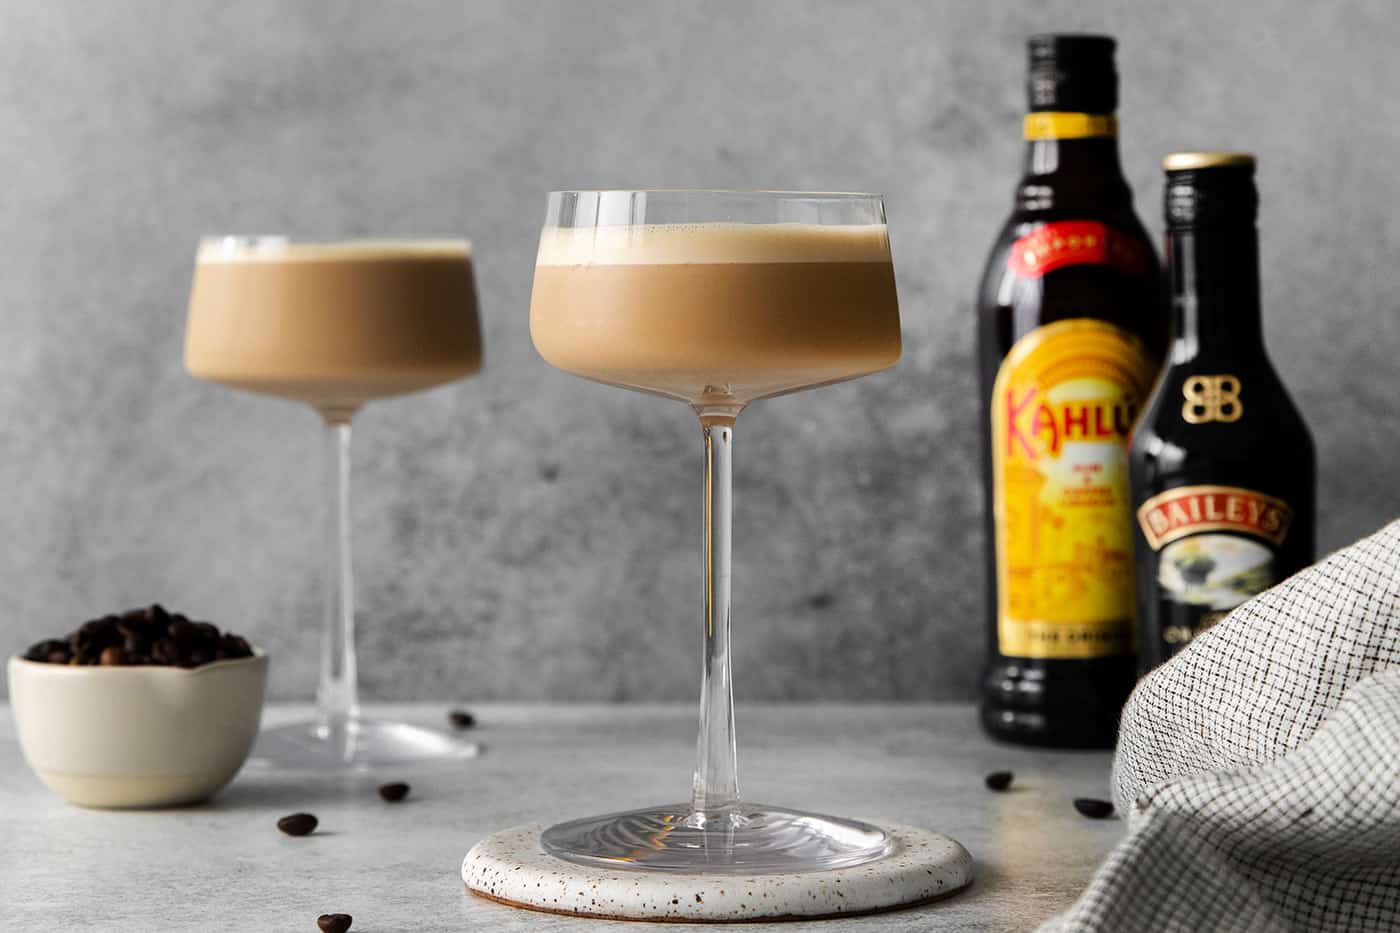 Two espresso martinis next to bottles of Kahlua and Baileys